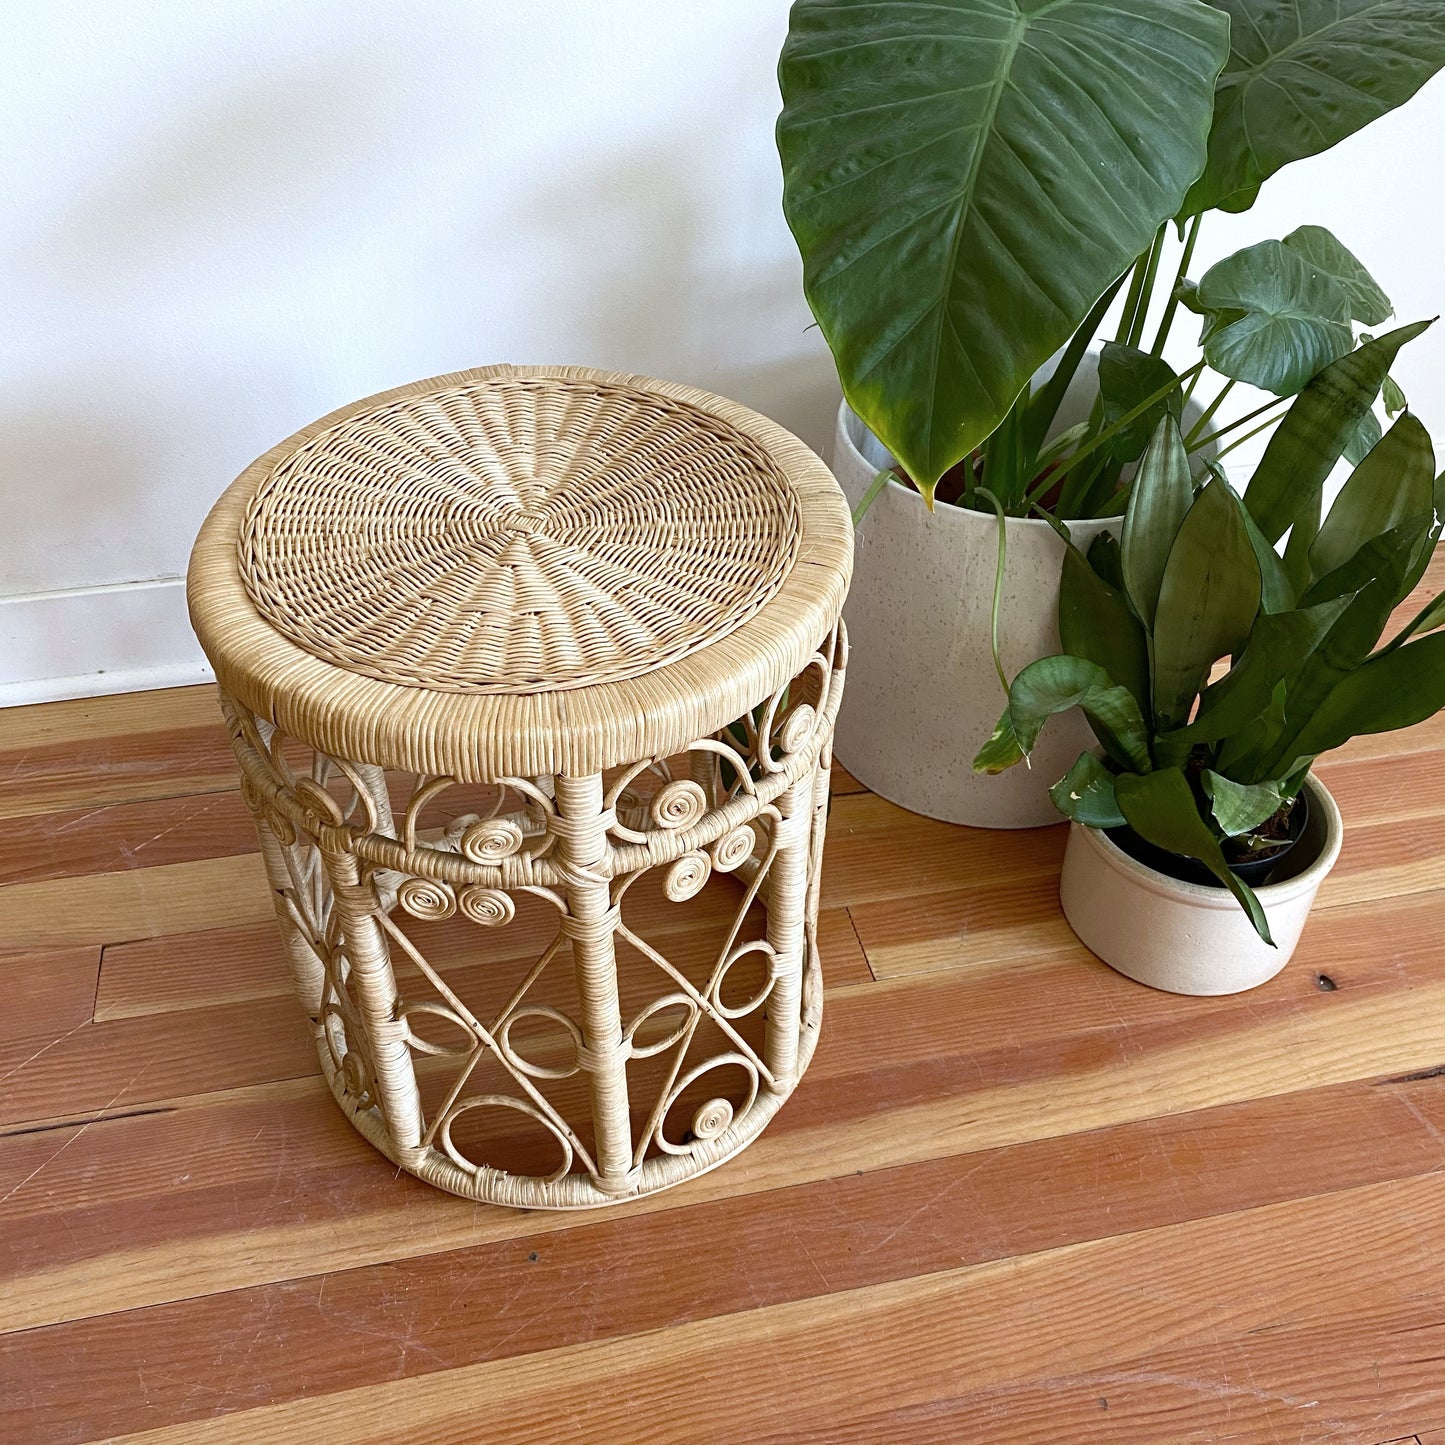 Vintage Wicker Stool / Plant Stand